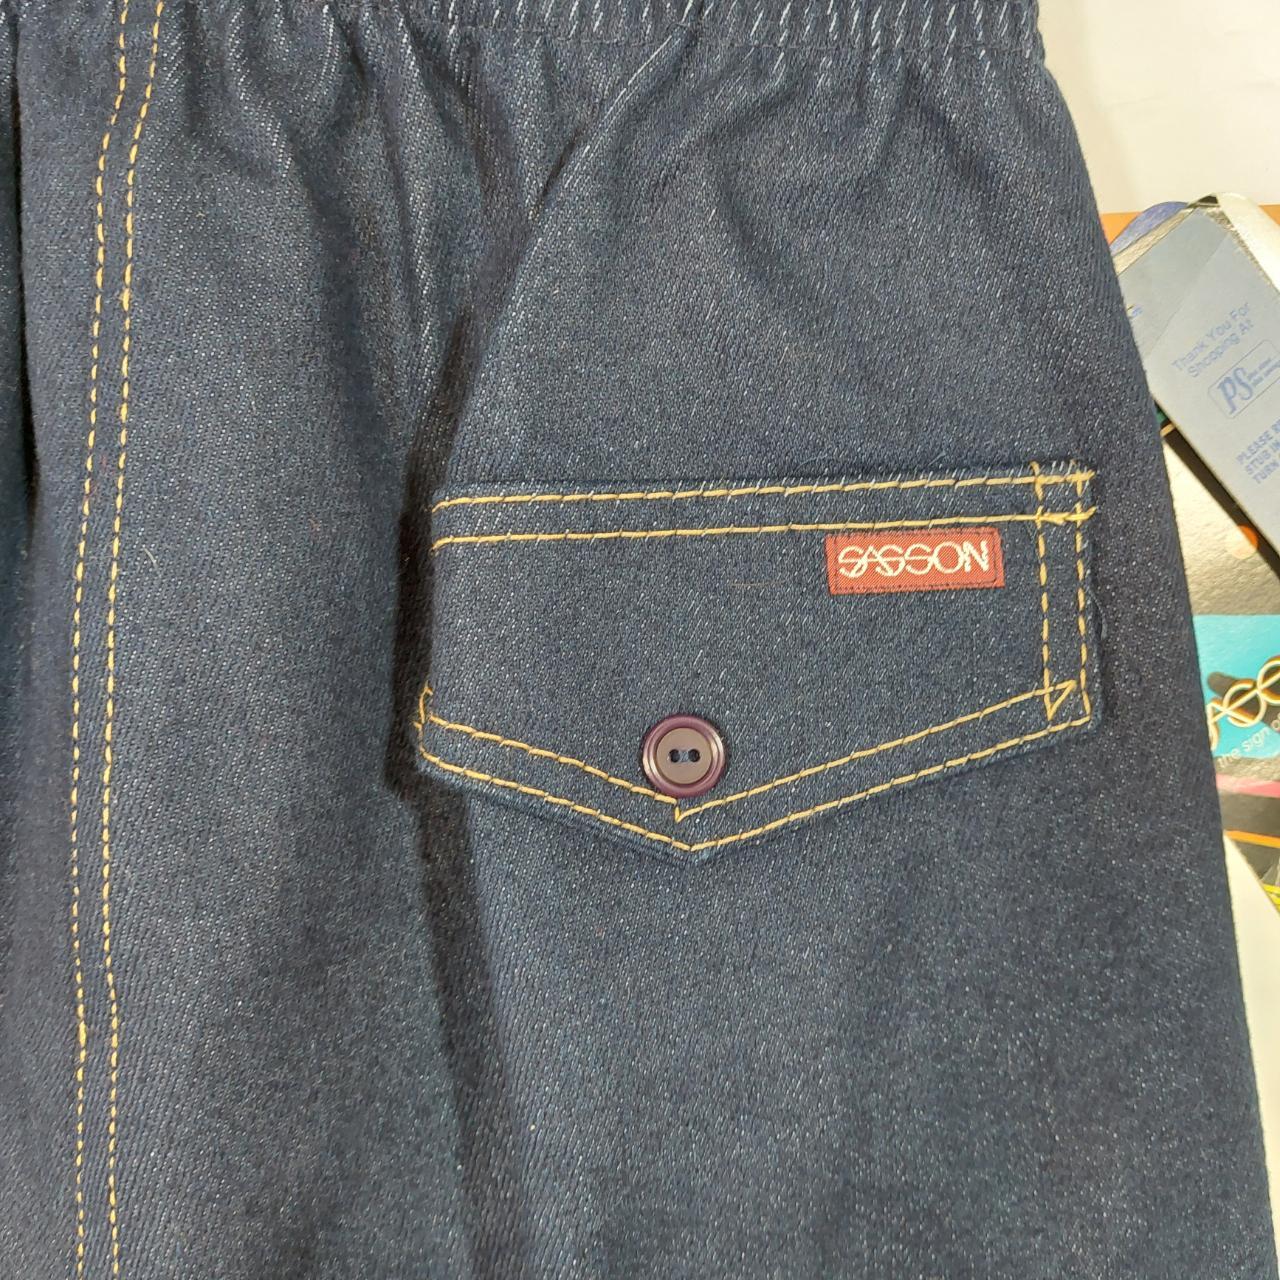 Product Image 4 - Vintage 80's Sasson Jeans Deadstock